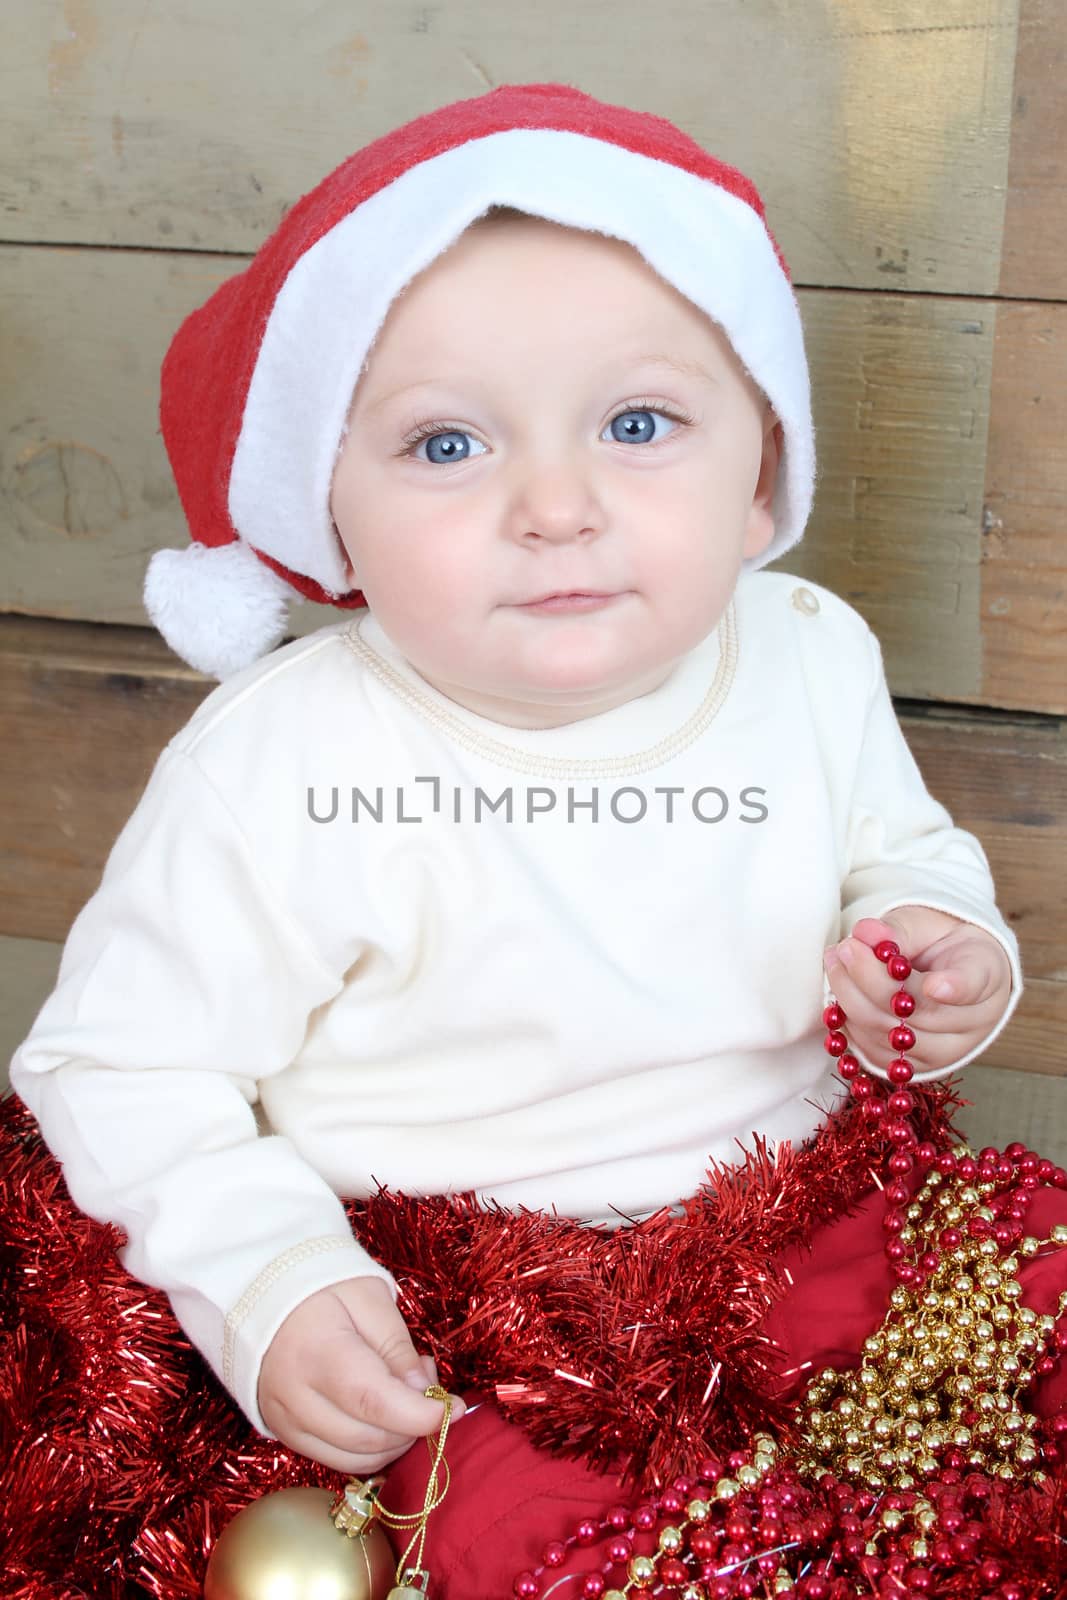 Baby boy wearing a christmas hat playing with decorations